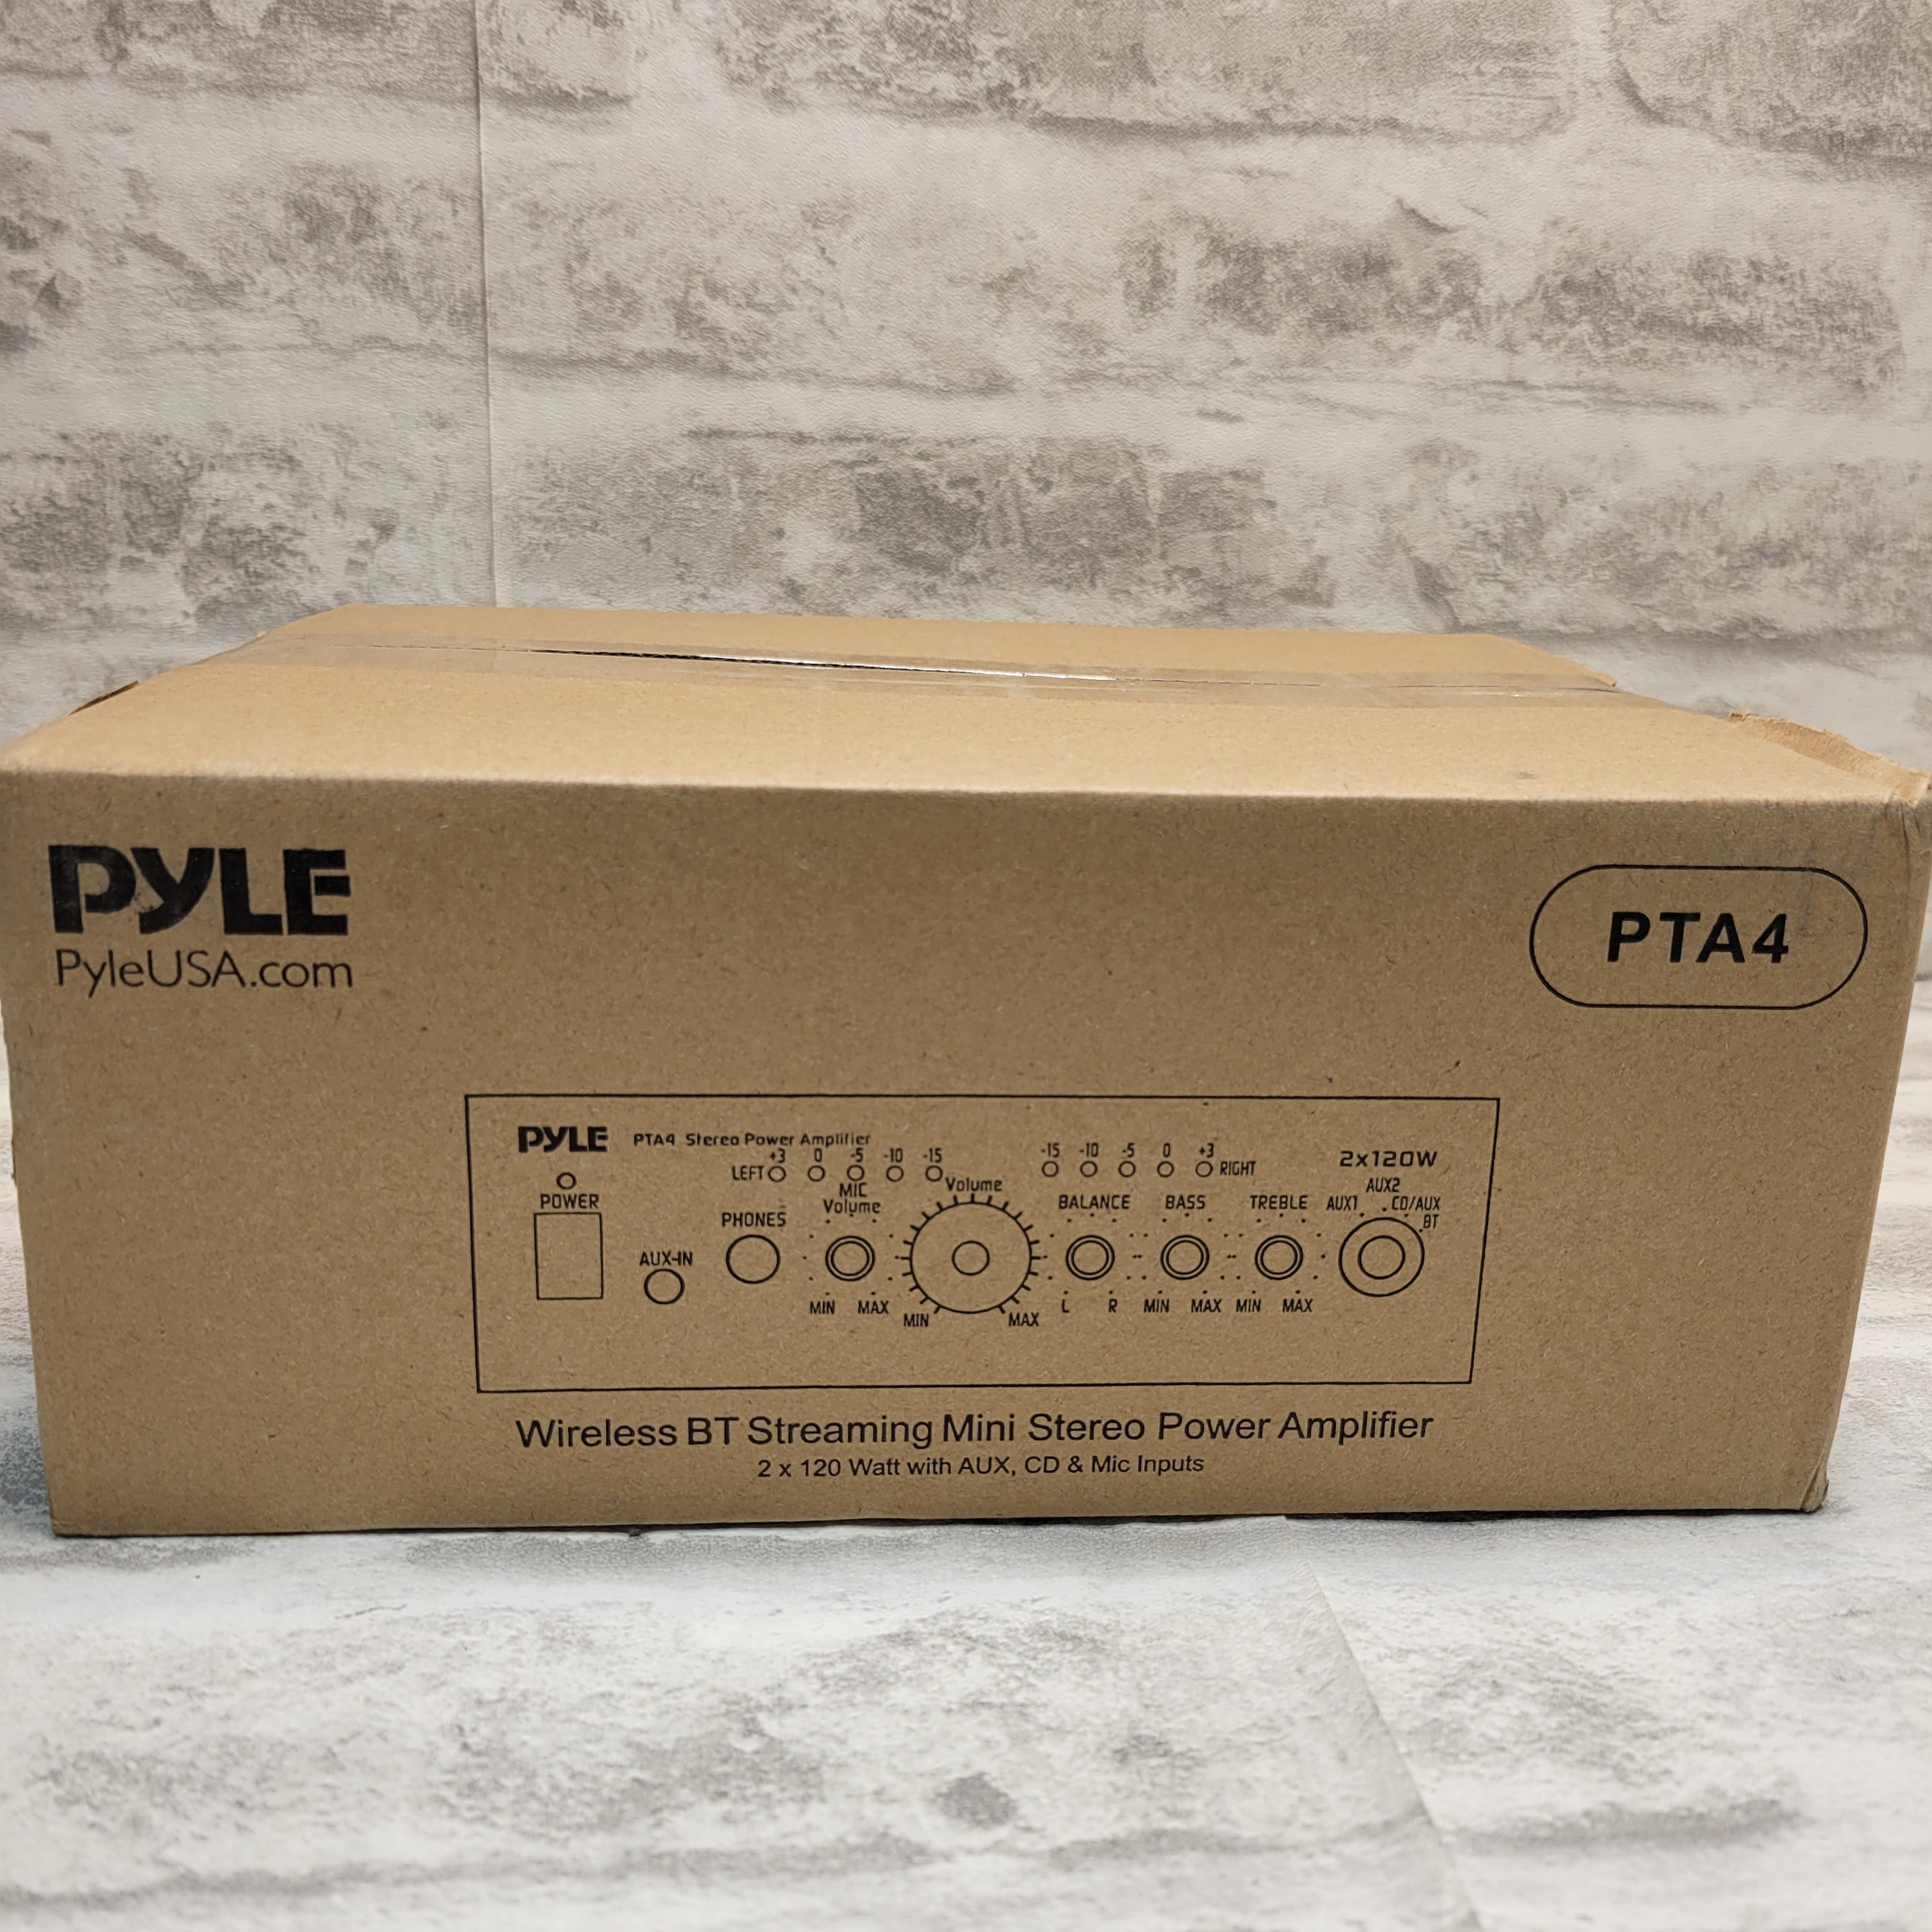 Pyle PTA4 Home Audio Power Amplifier System with Bluetooth (7857392484590)